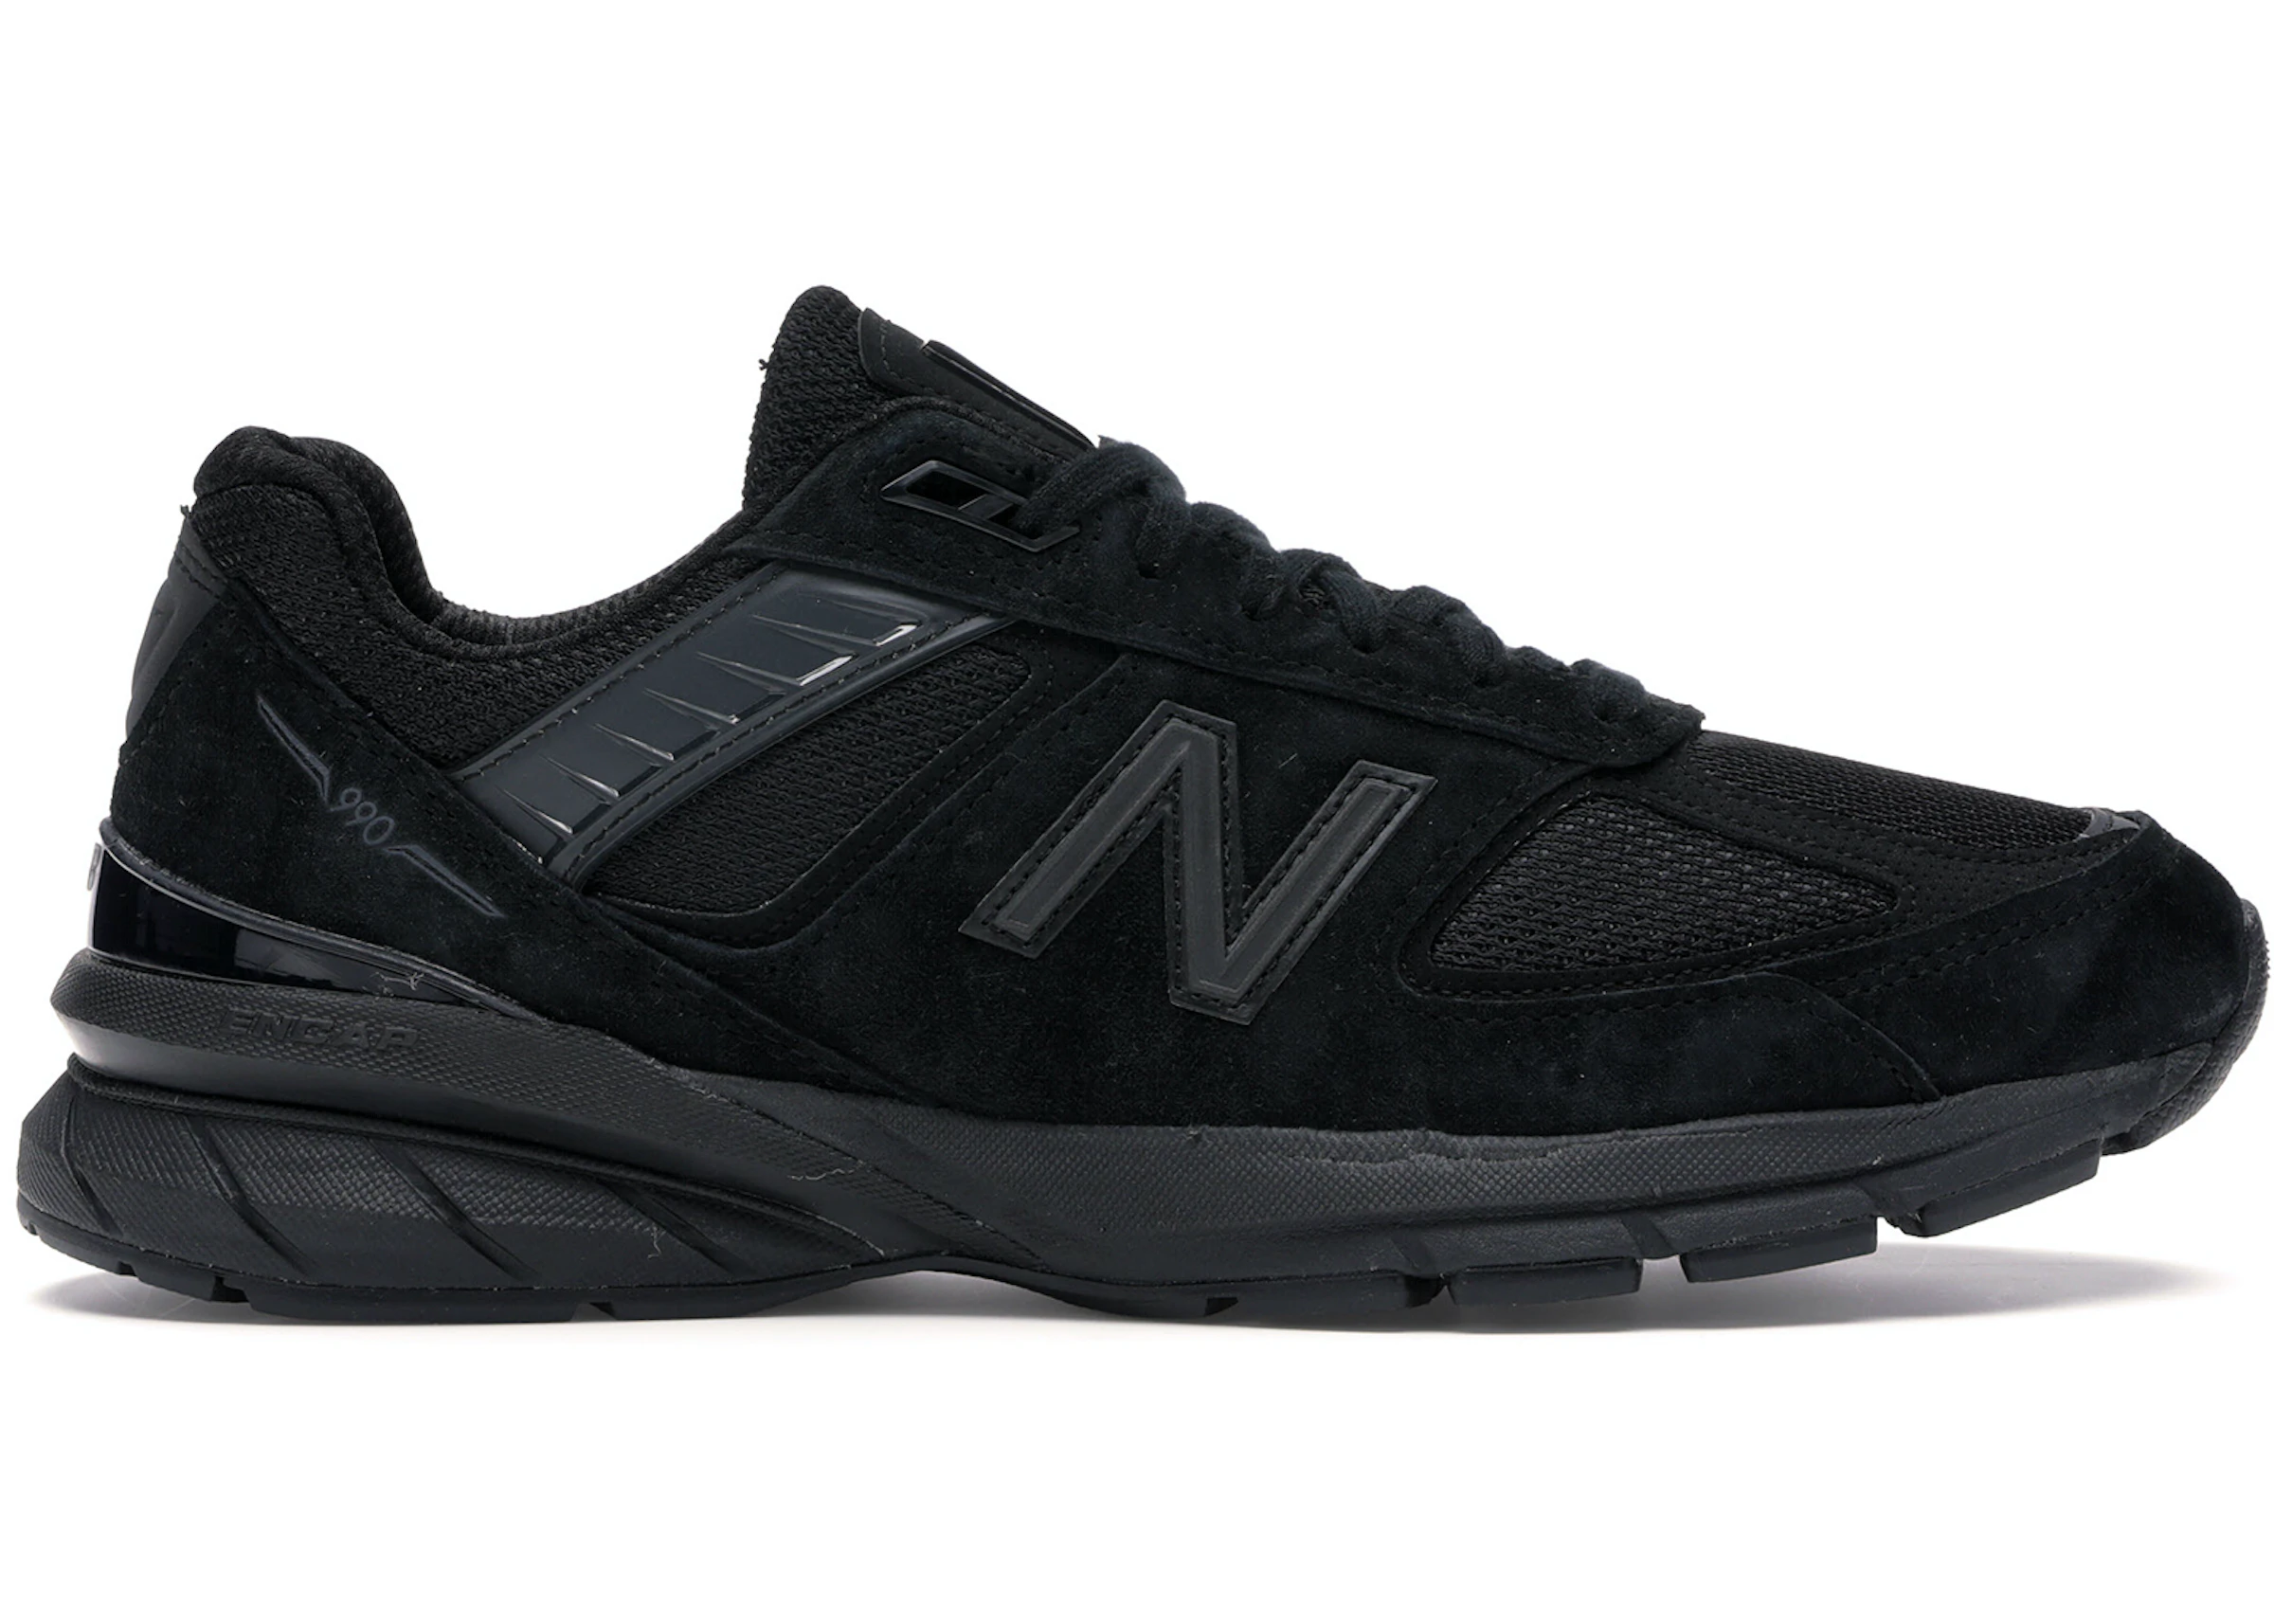 Lost Thorns Overcast New Balance 990v5 Made in USA Triple Black - M990BB5 - US